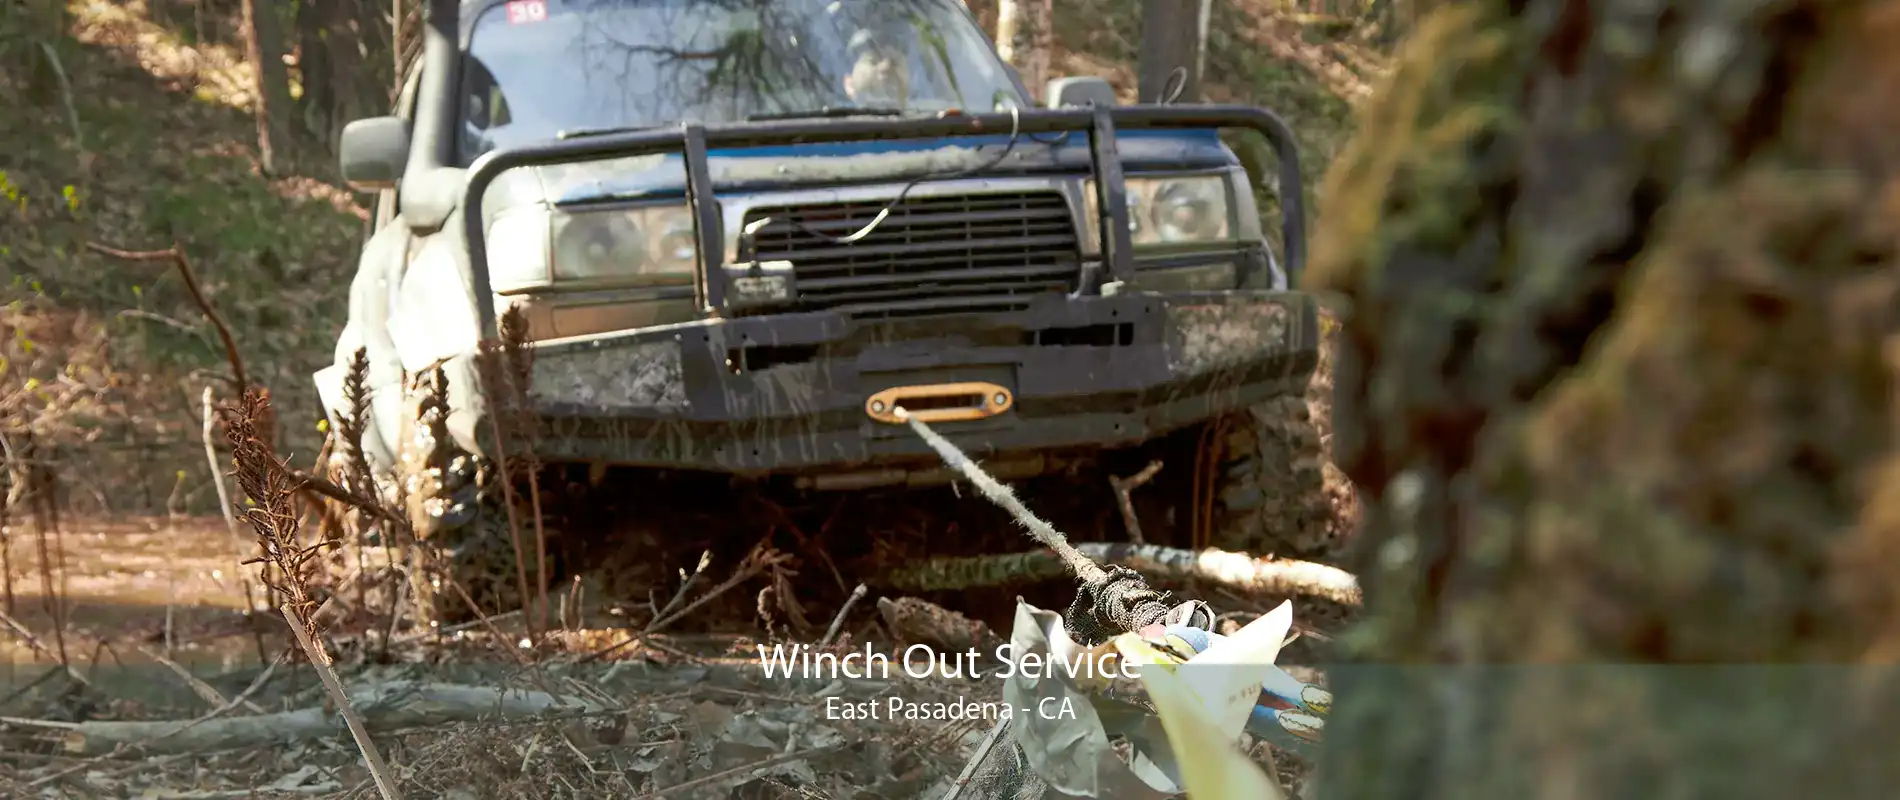 Winch Out Service East Pasadena - CA